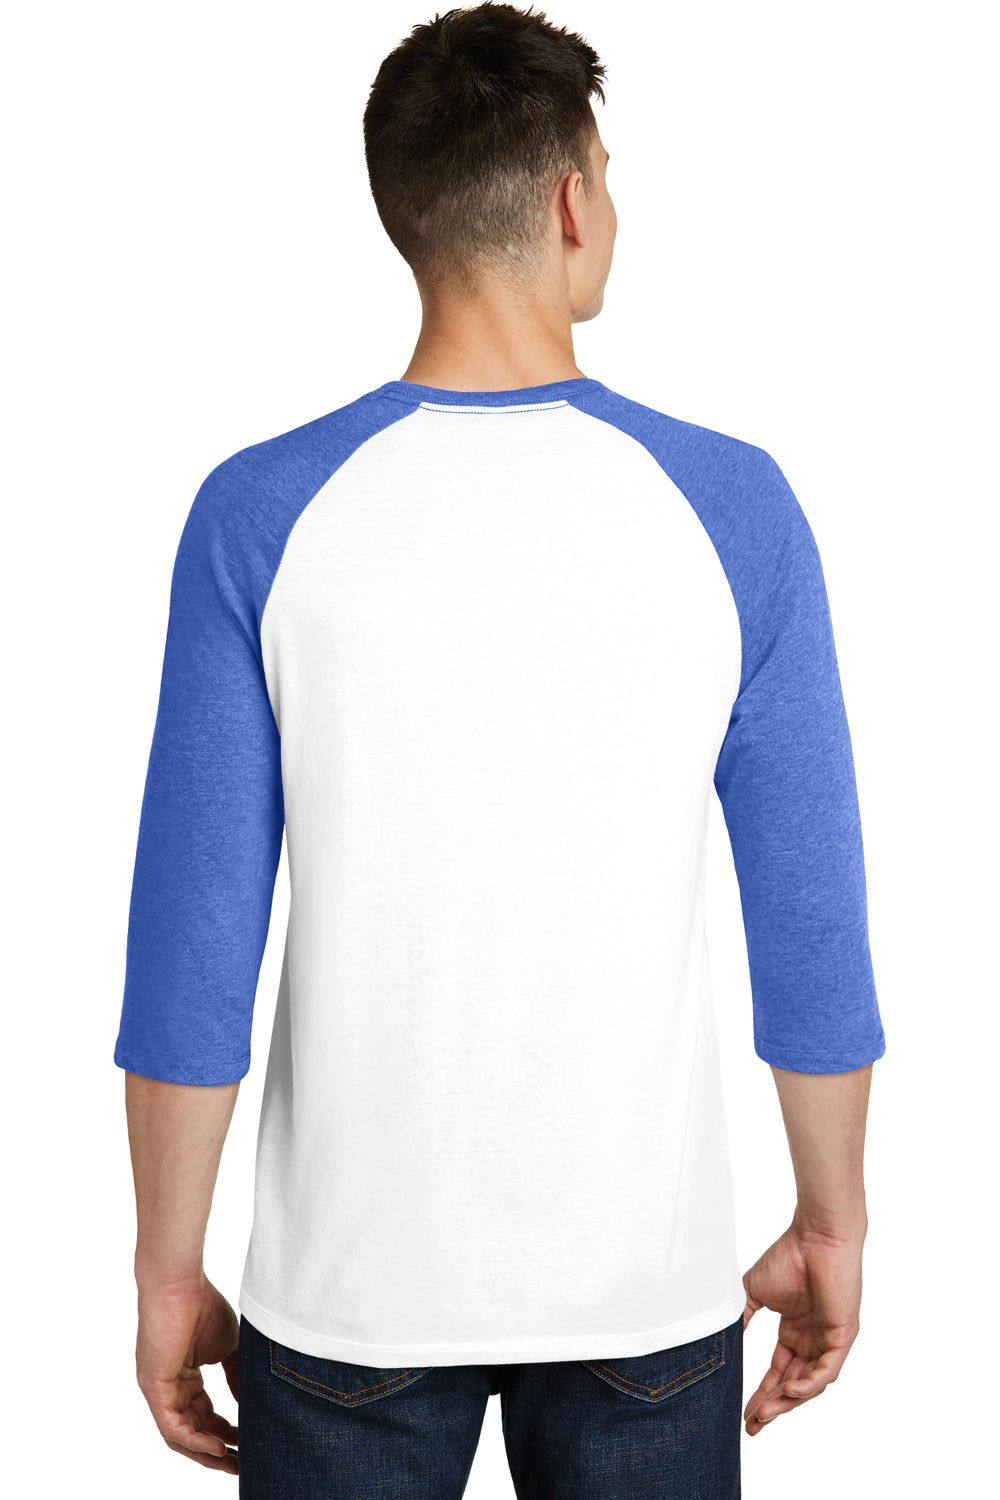 District DT6210 Mens Very Important 3/4 Sleeve Crewneck T-Shirt White/Heather Royal Blue Back